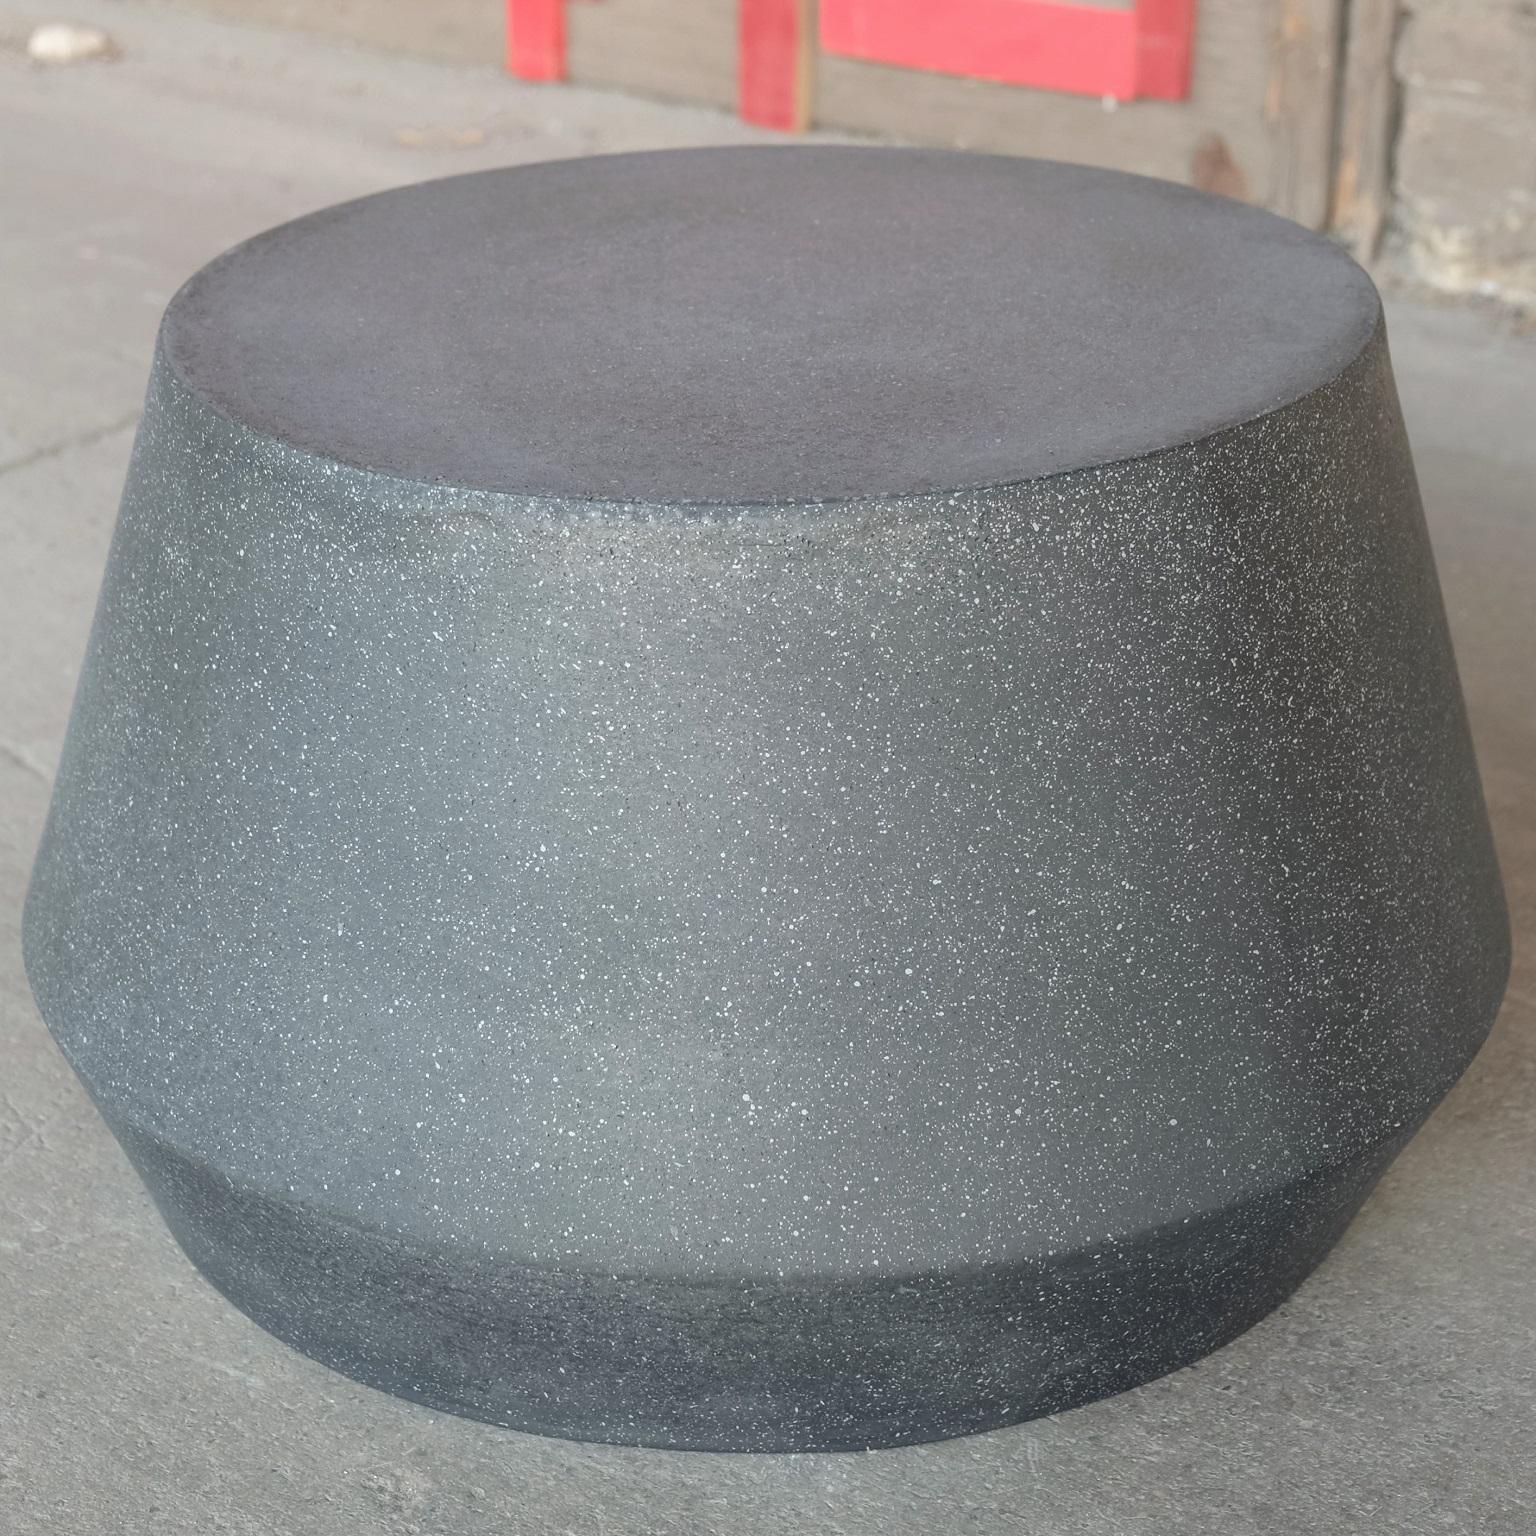 Elegantly playful and a bright complement.

Dimensions: Diameter 24 in. (61 cm), height 14 in. (36 cm), weight 20 lbs. (9 kg)

Finish color options:
White stone
Natural stone
Aged stone
Keystone
Coal stone (shown)

Materials: Resin, stone aggregate